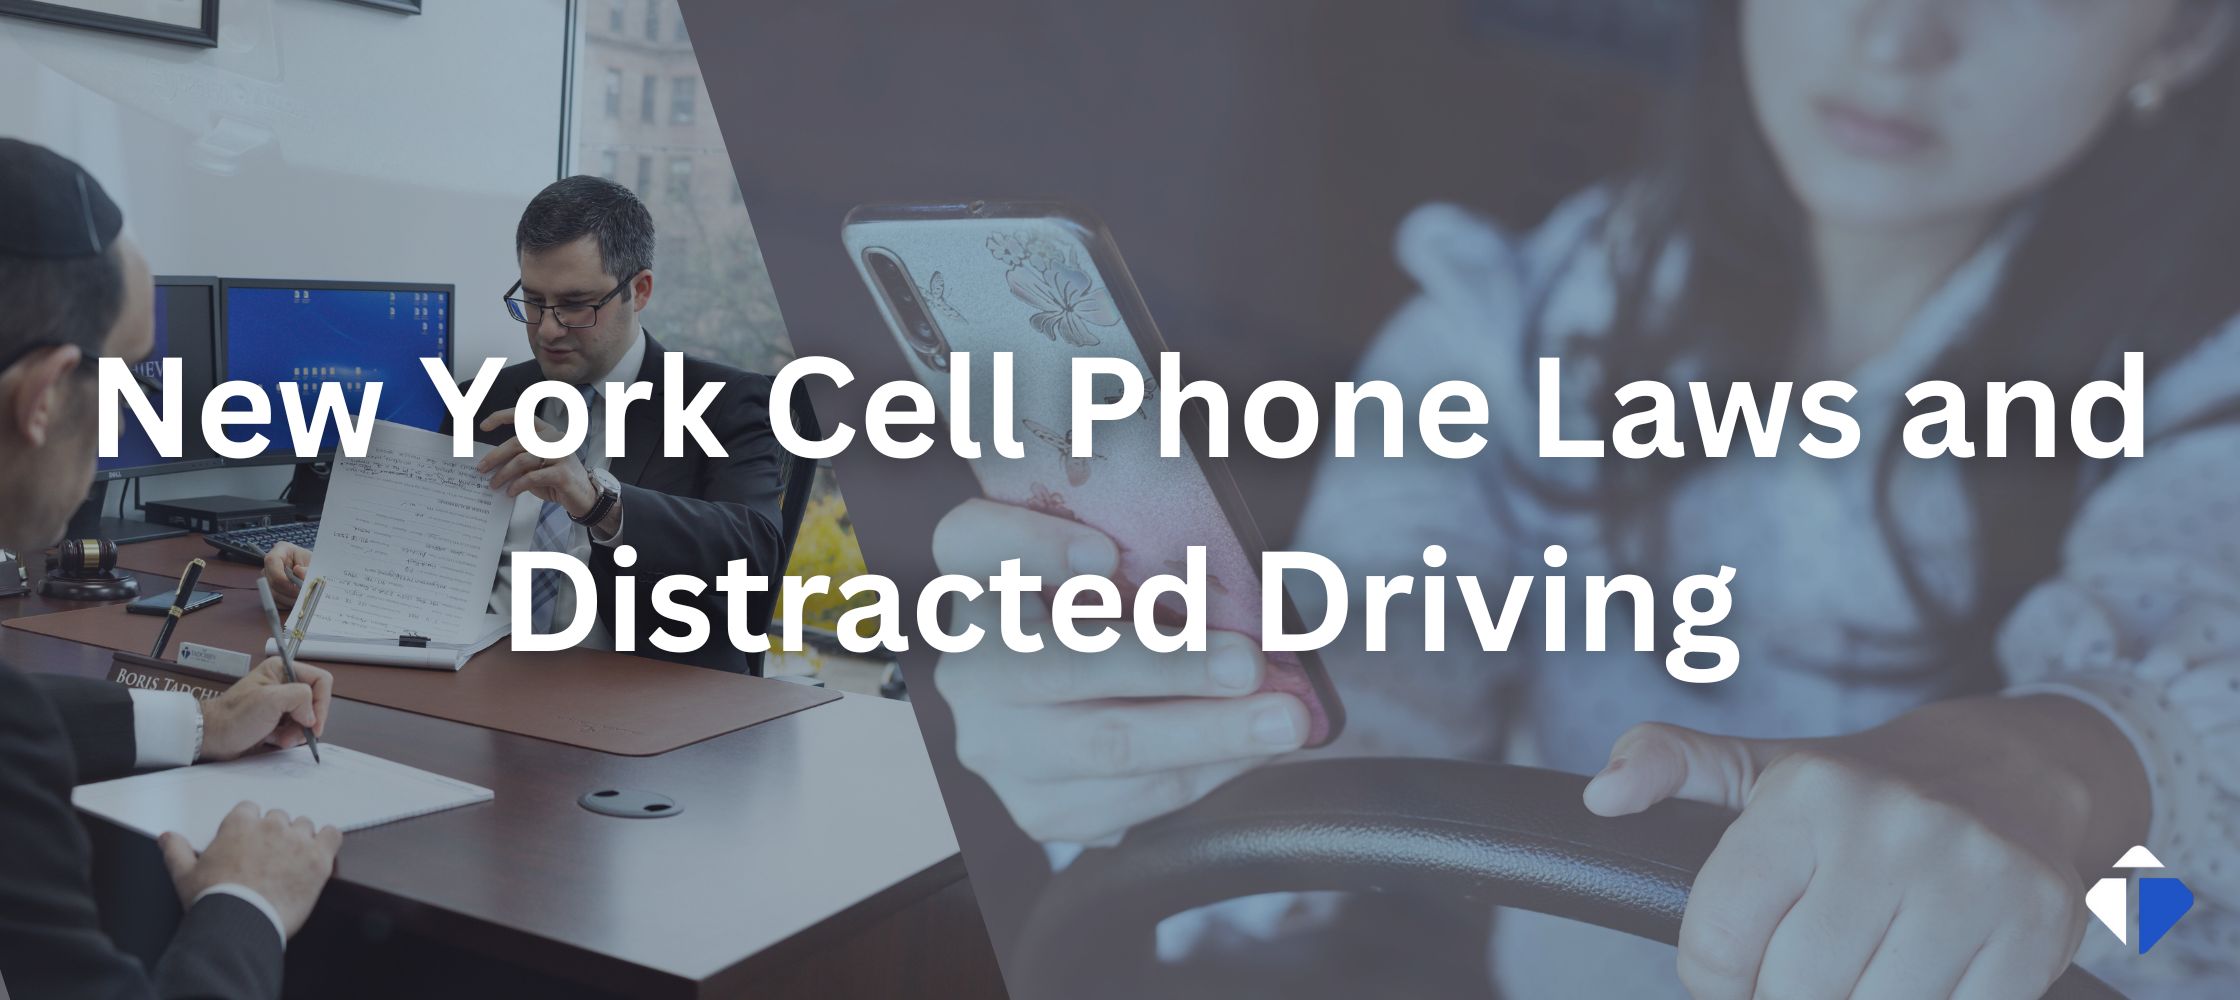 Distracted Driving Laws in New York